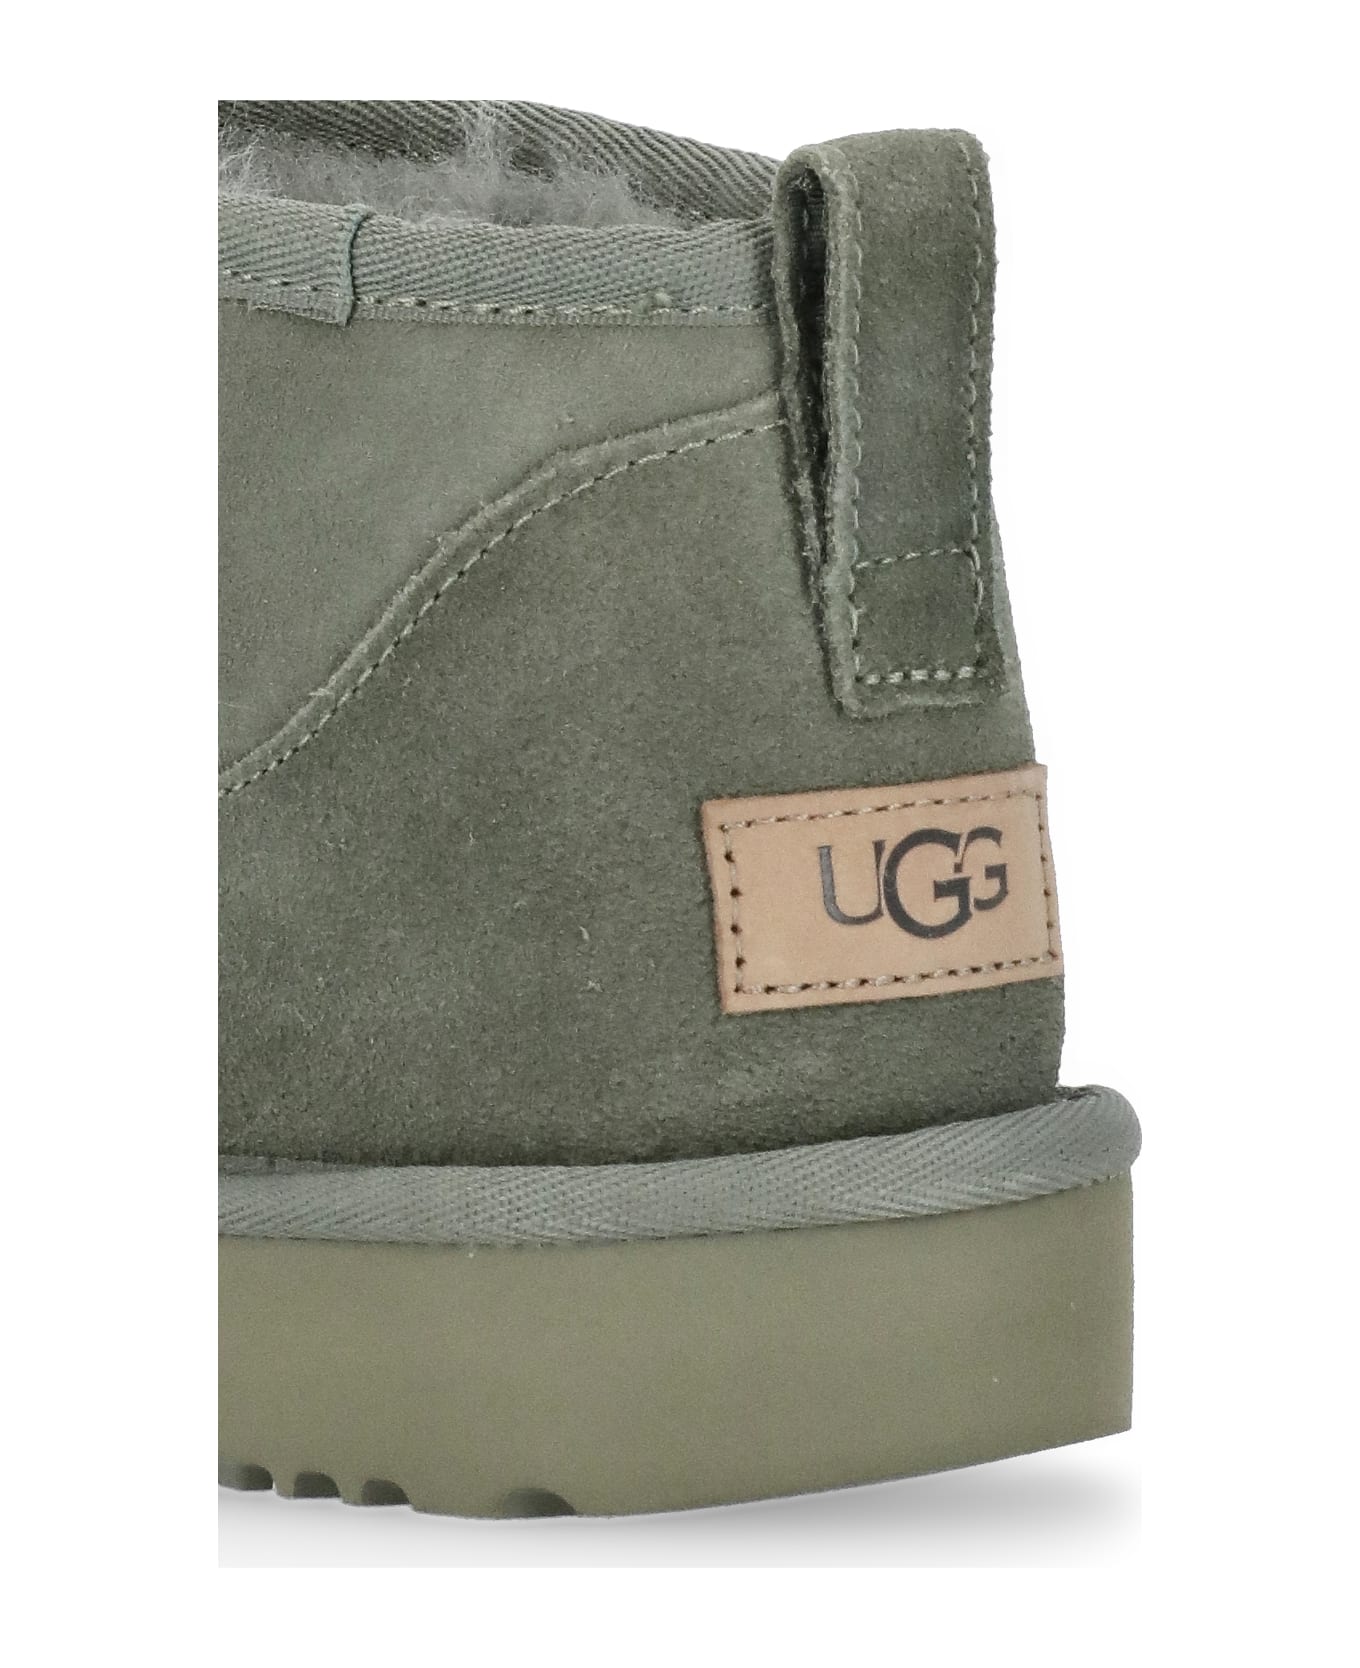 UGG Classic Ultra Mini Ankle Boots - Green